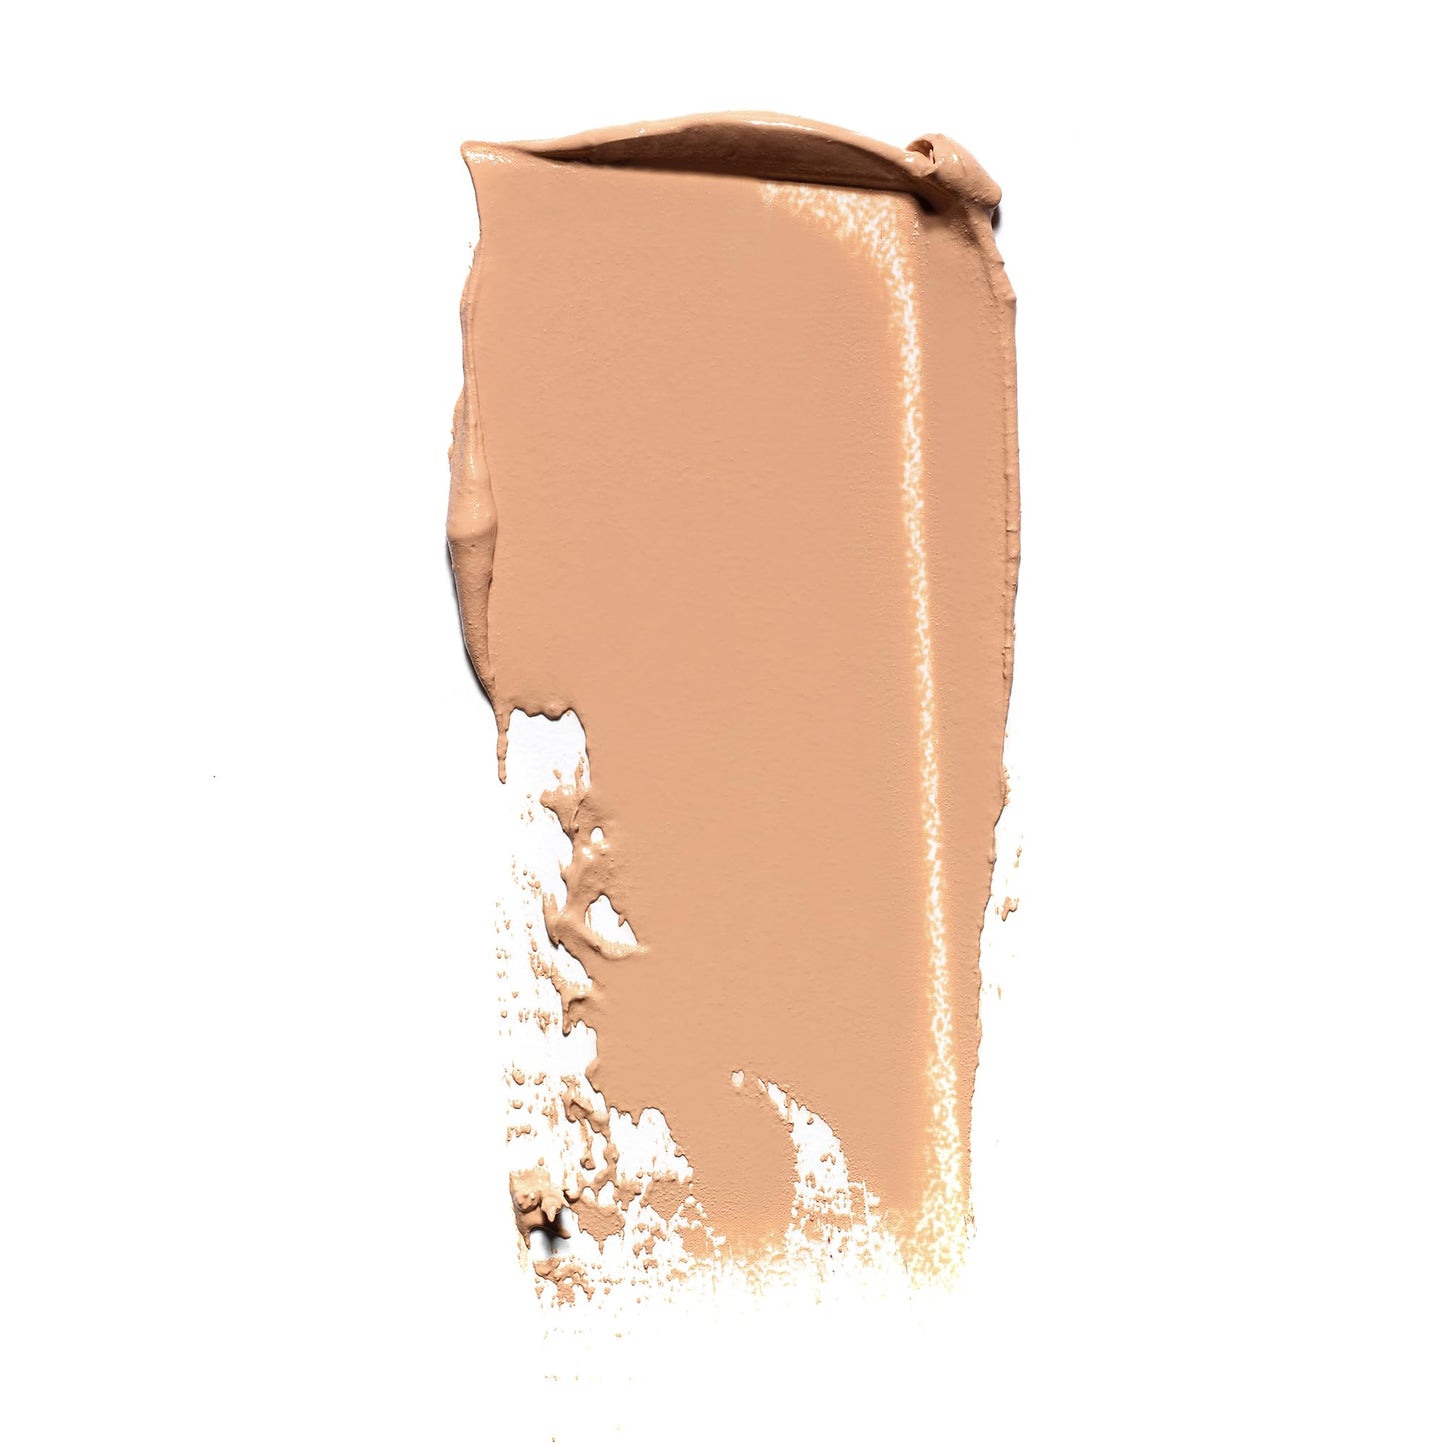 Well People Bio Stick Foundation, Creamy, Multi-use, Hydrating Foundation For Glowing Skin, Creates A Natural, Satin Finish, Vegan & Cruelty-free, 1C